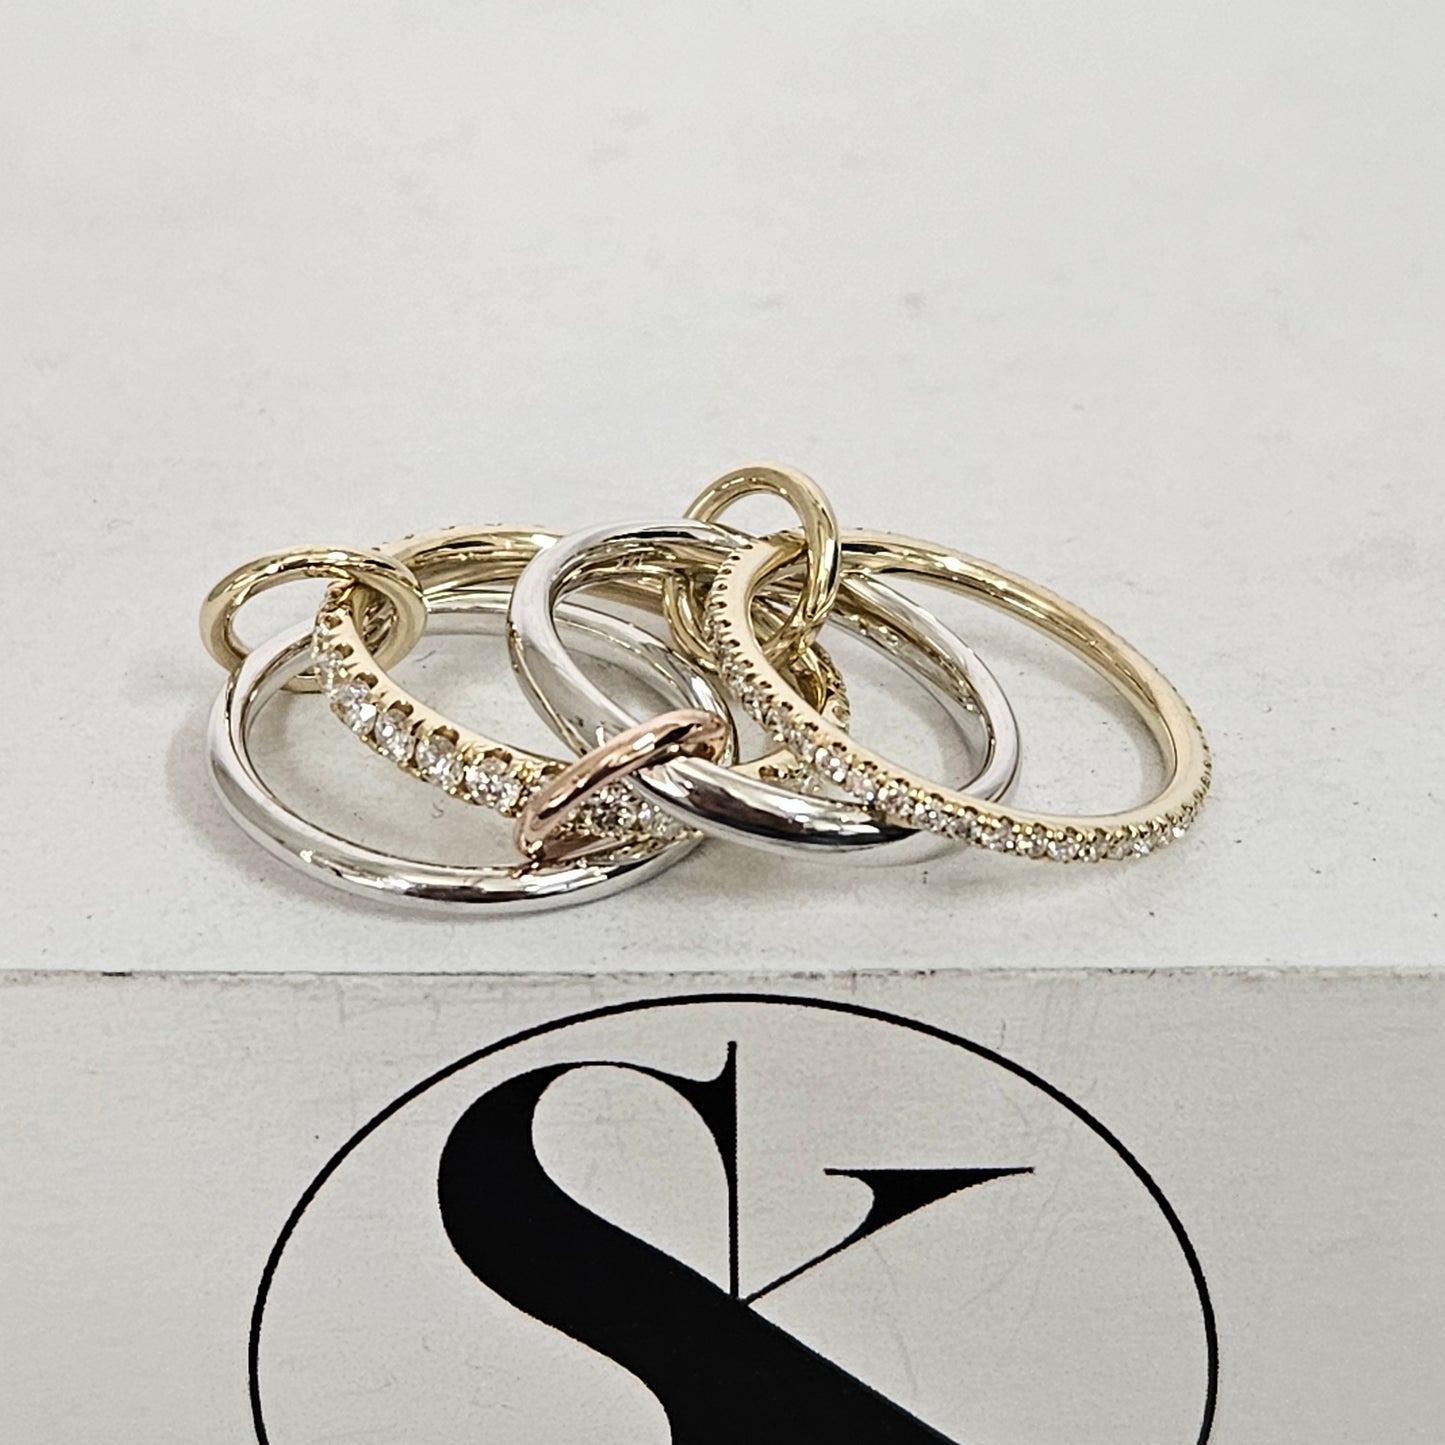 Stacking Rings with Connectors/Yellow Rose White gold 4 Bands with 3 connectors/Eternity Diamond Rings for Everyday/Sean's Bundle of 4 Rings